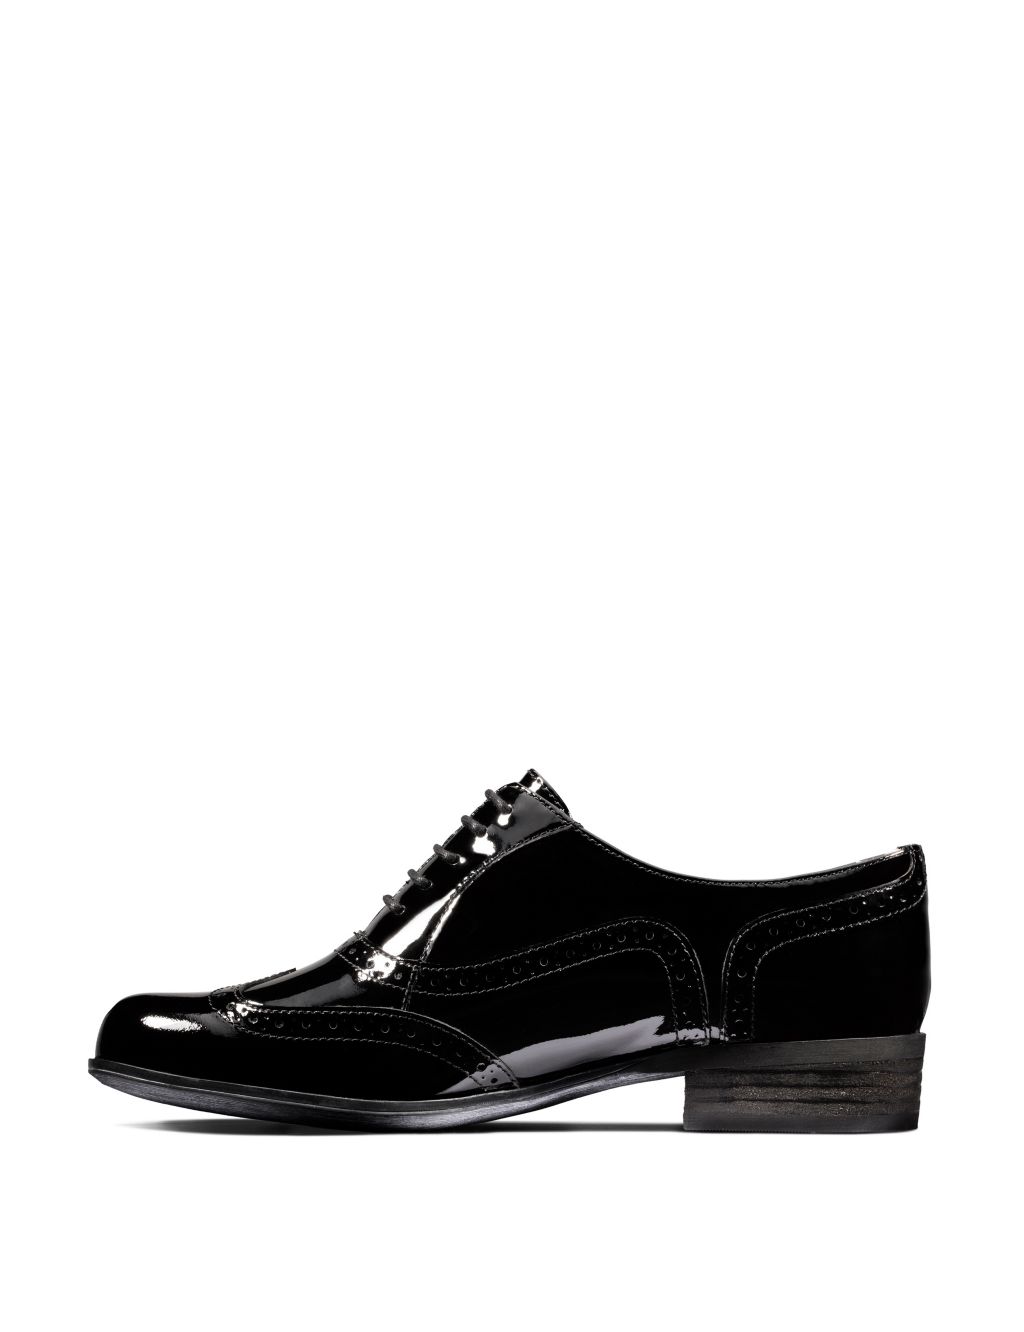 Wide Fit Leather Patent Brogues image 5